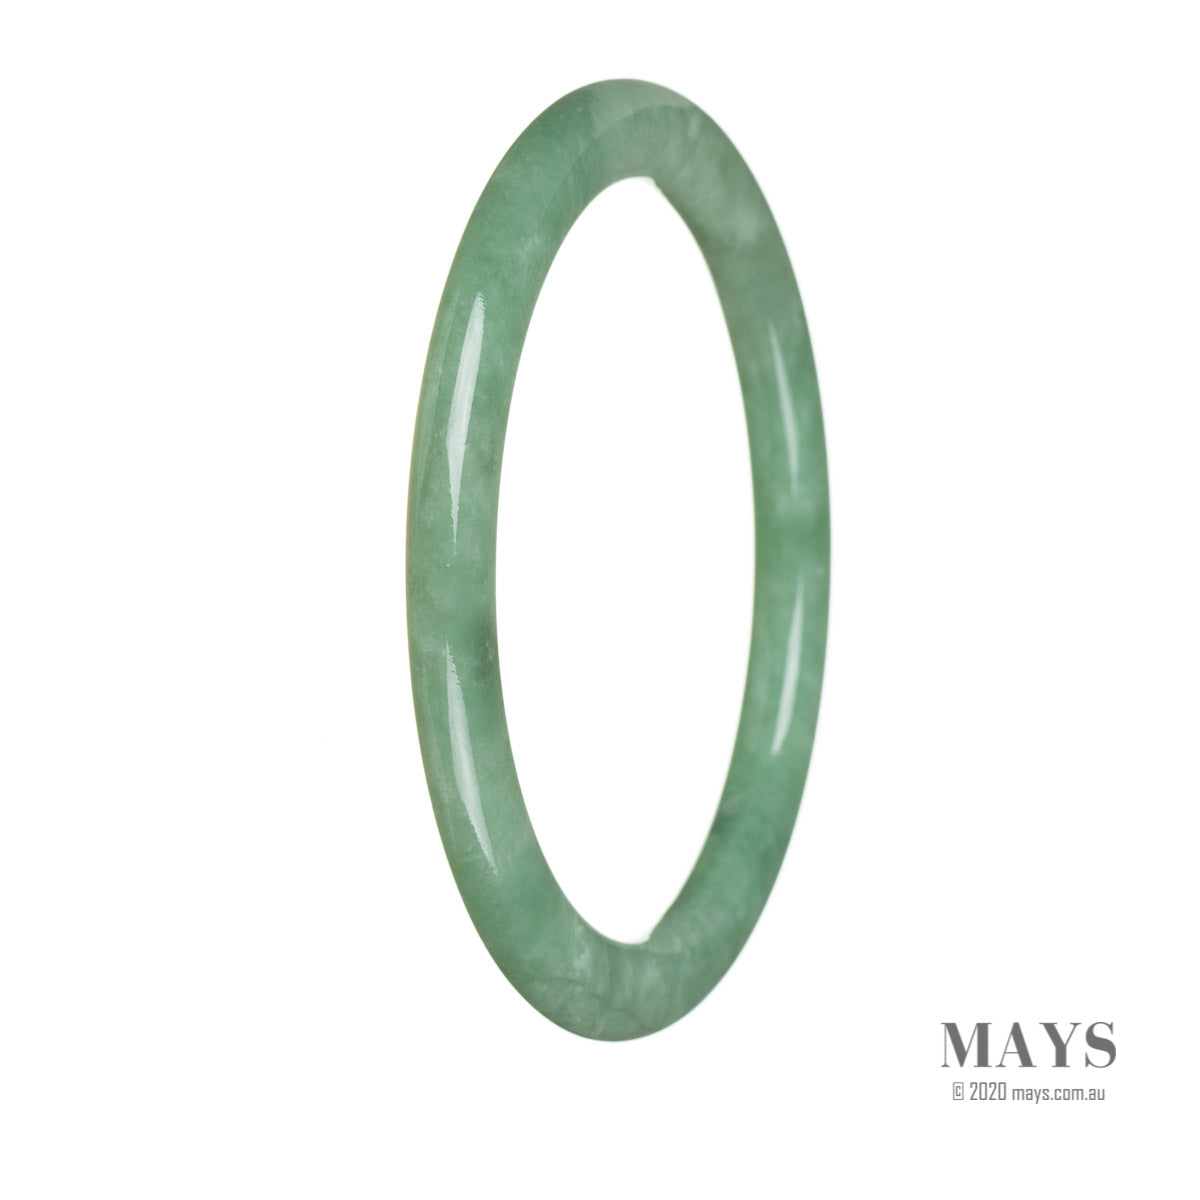 A small, round, bright green jade bracelet, certified as Grade A quality.